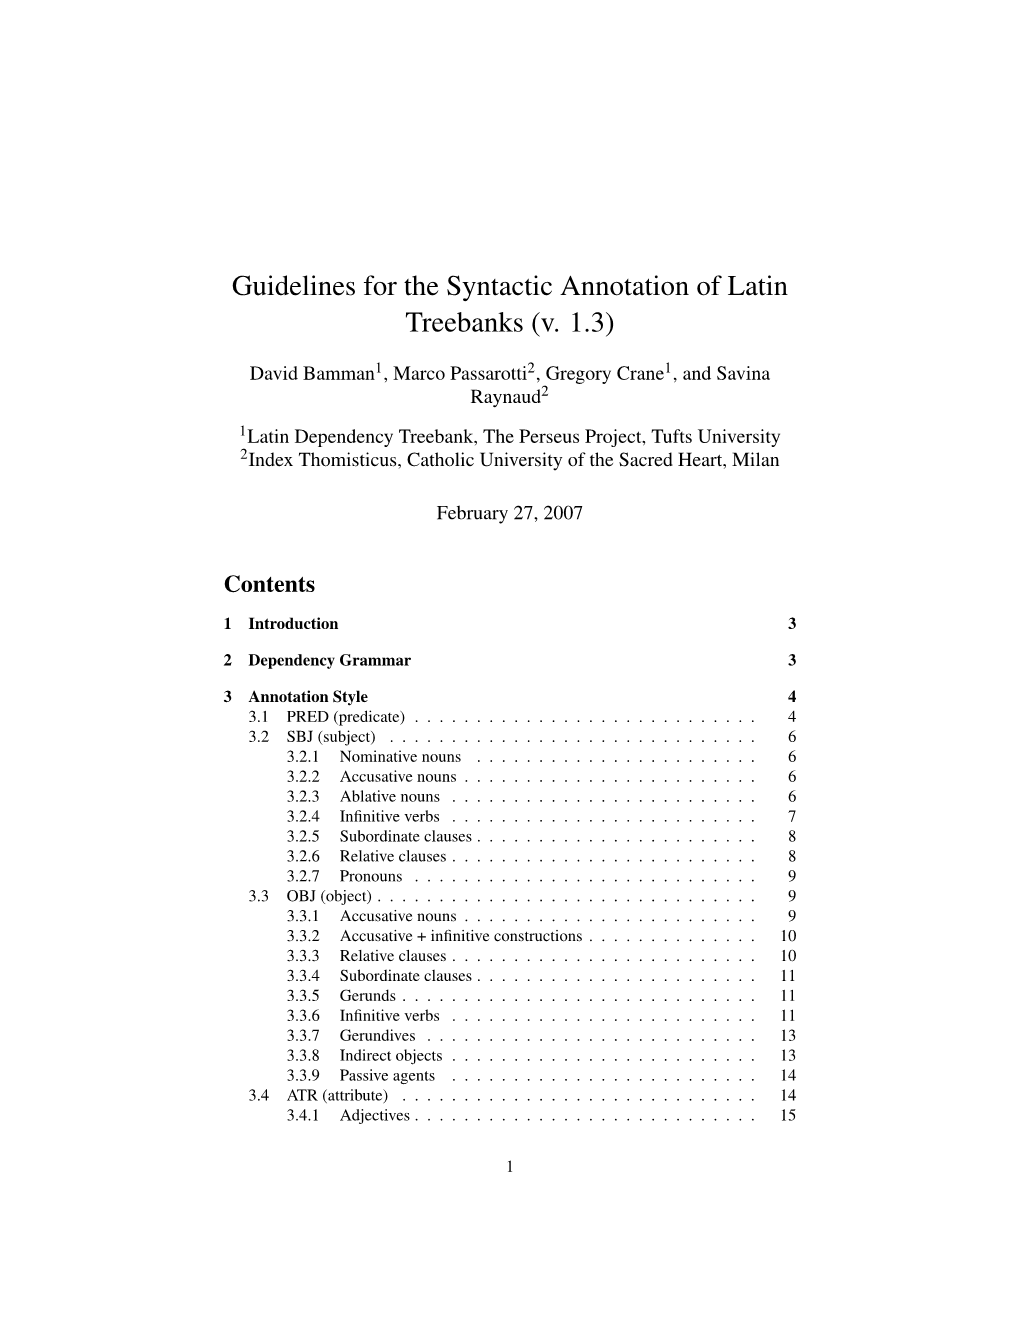 Guidelines for the Syntactic Annotation of Latin Treebanks (V. 1.3)